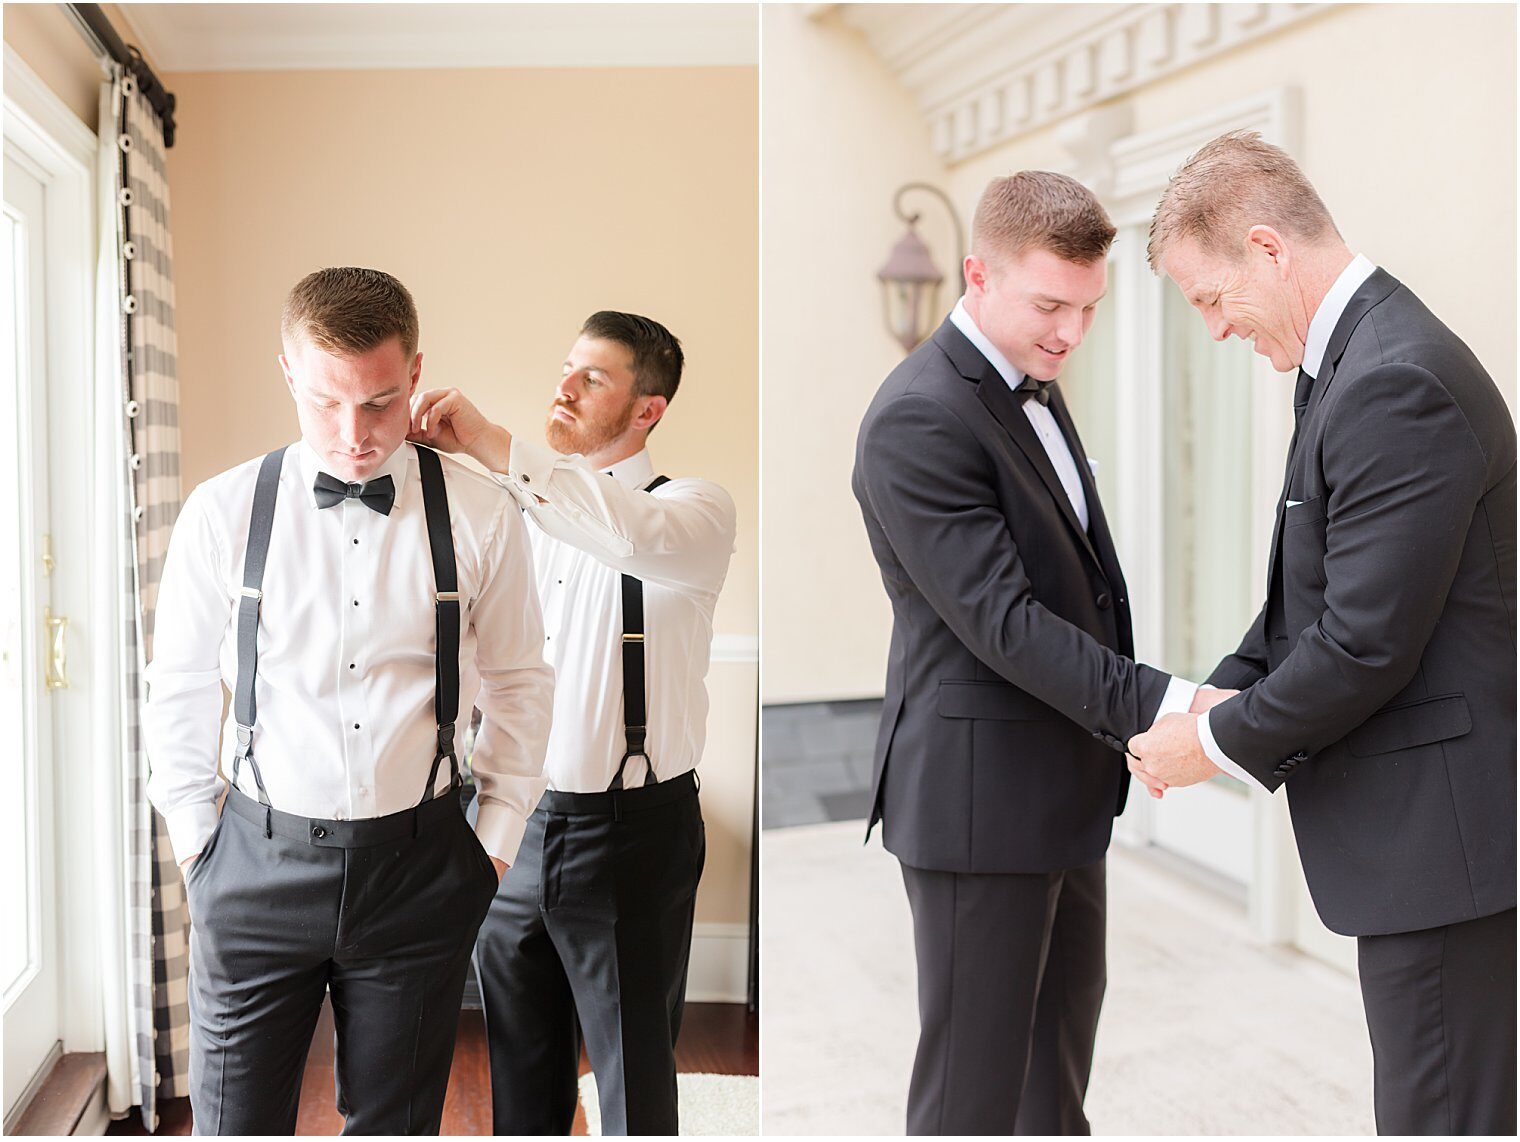 Best man and father of the groom helping him to get ready